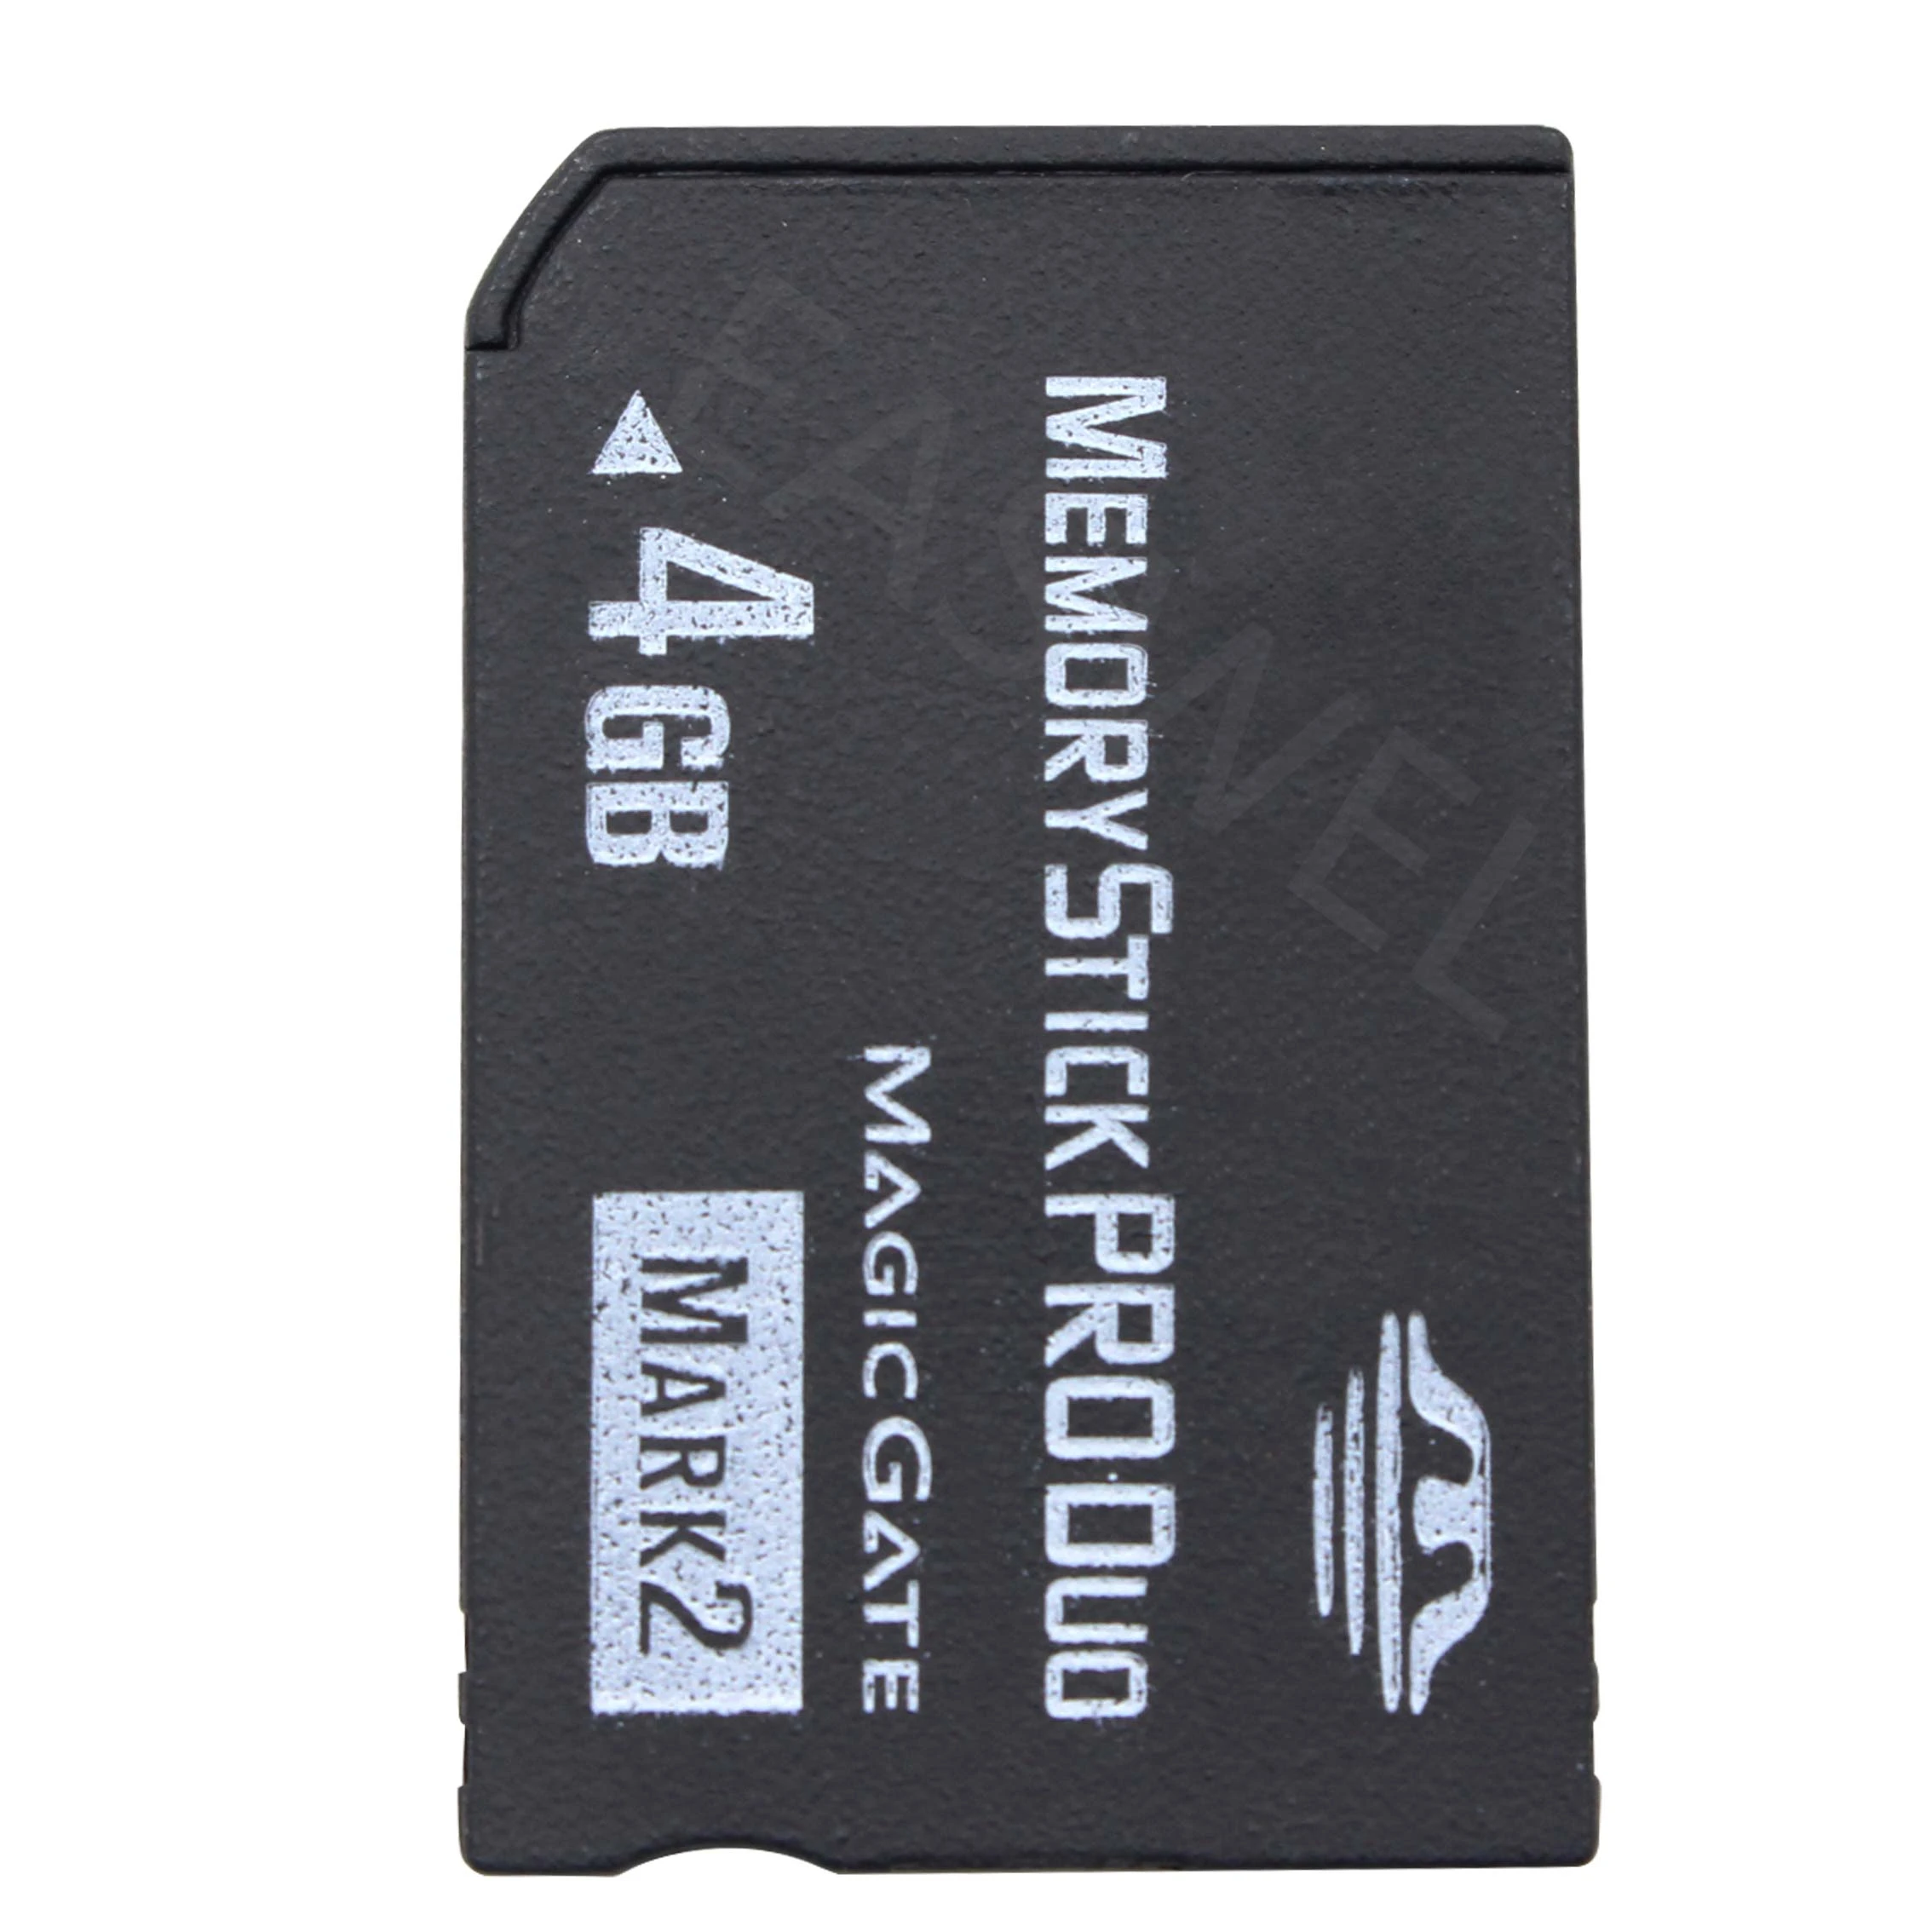 Drama invadere Imponerende 4GB Memory Stick Pro Duo MS Card, Memory card for Sony Camera/PSP/Recorder|AC/DC  Adapters| - AliExpress